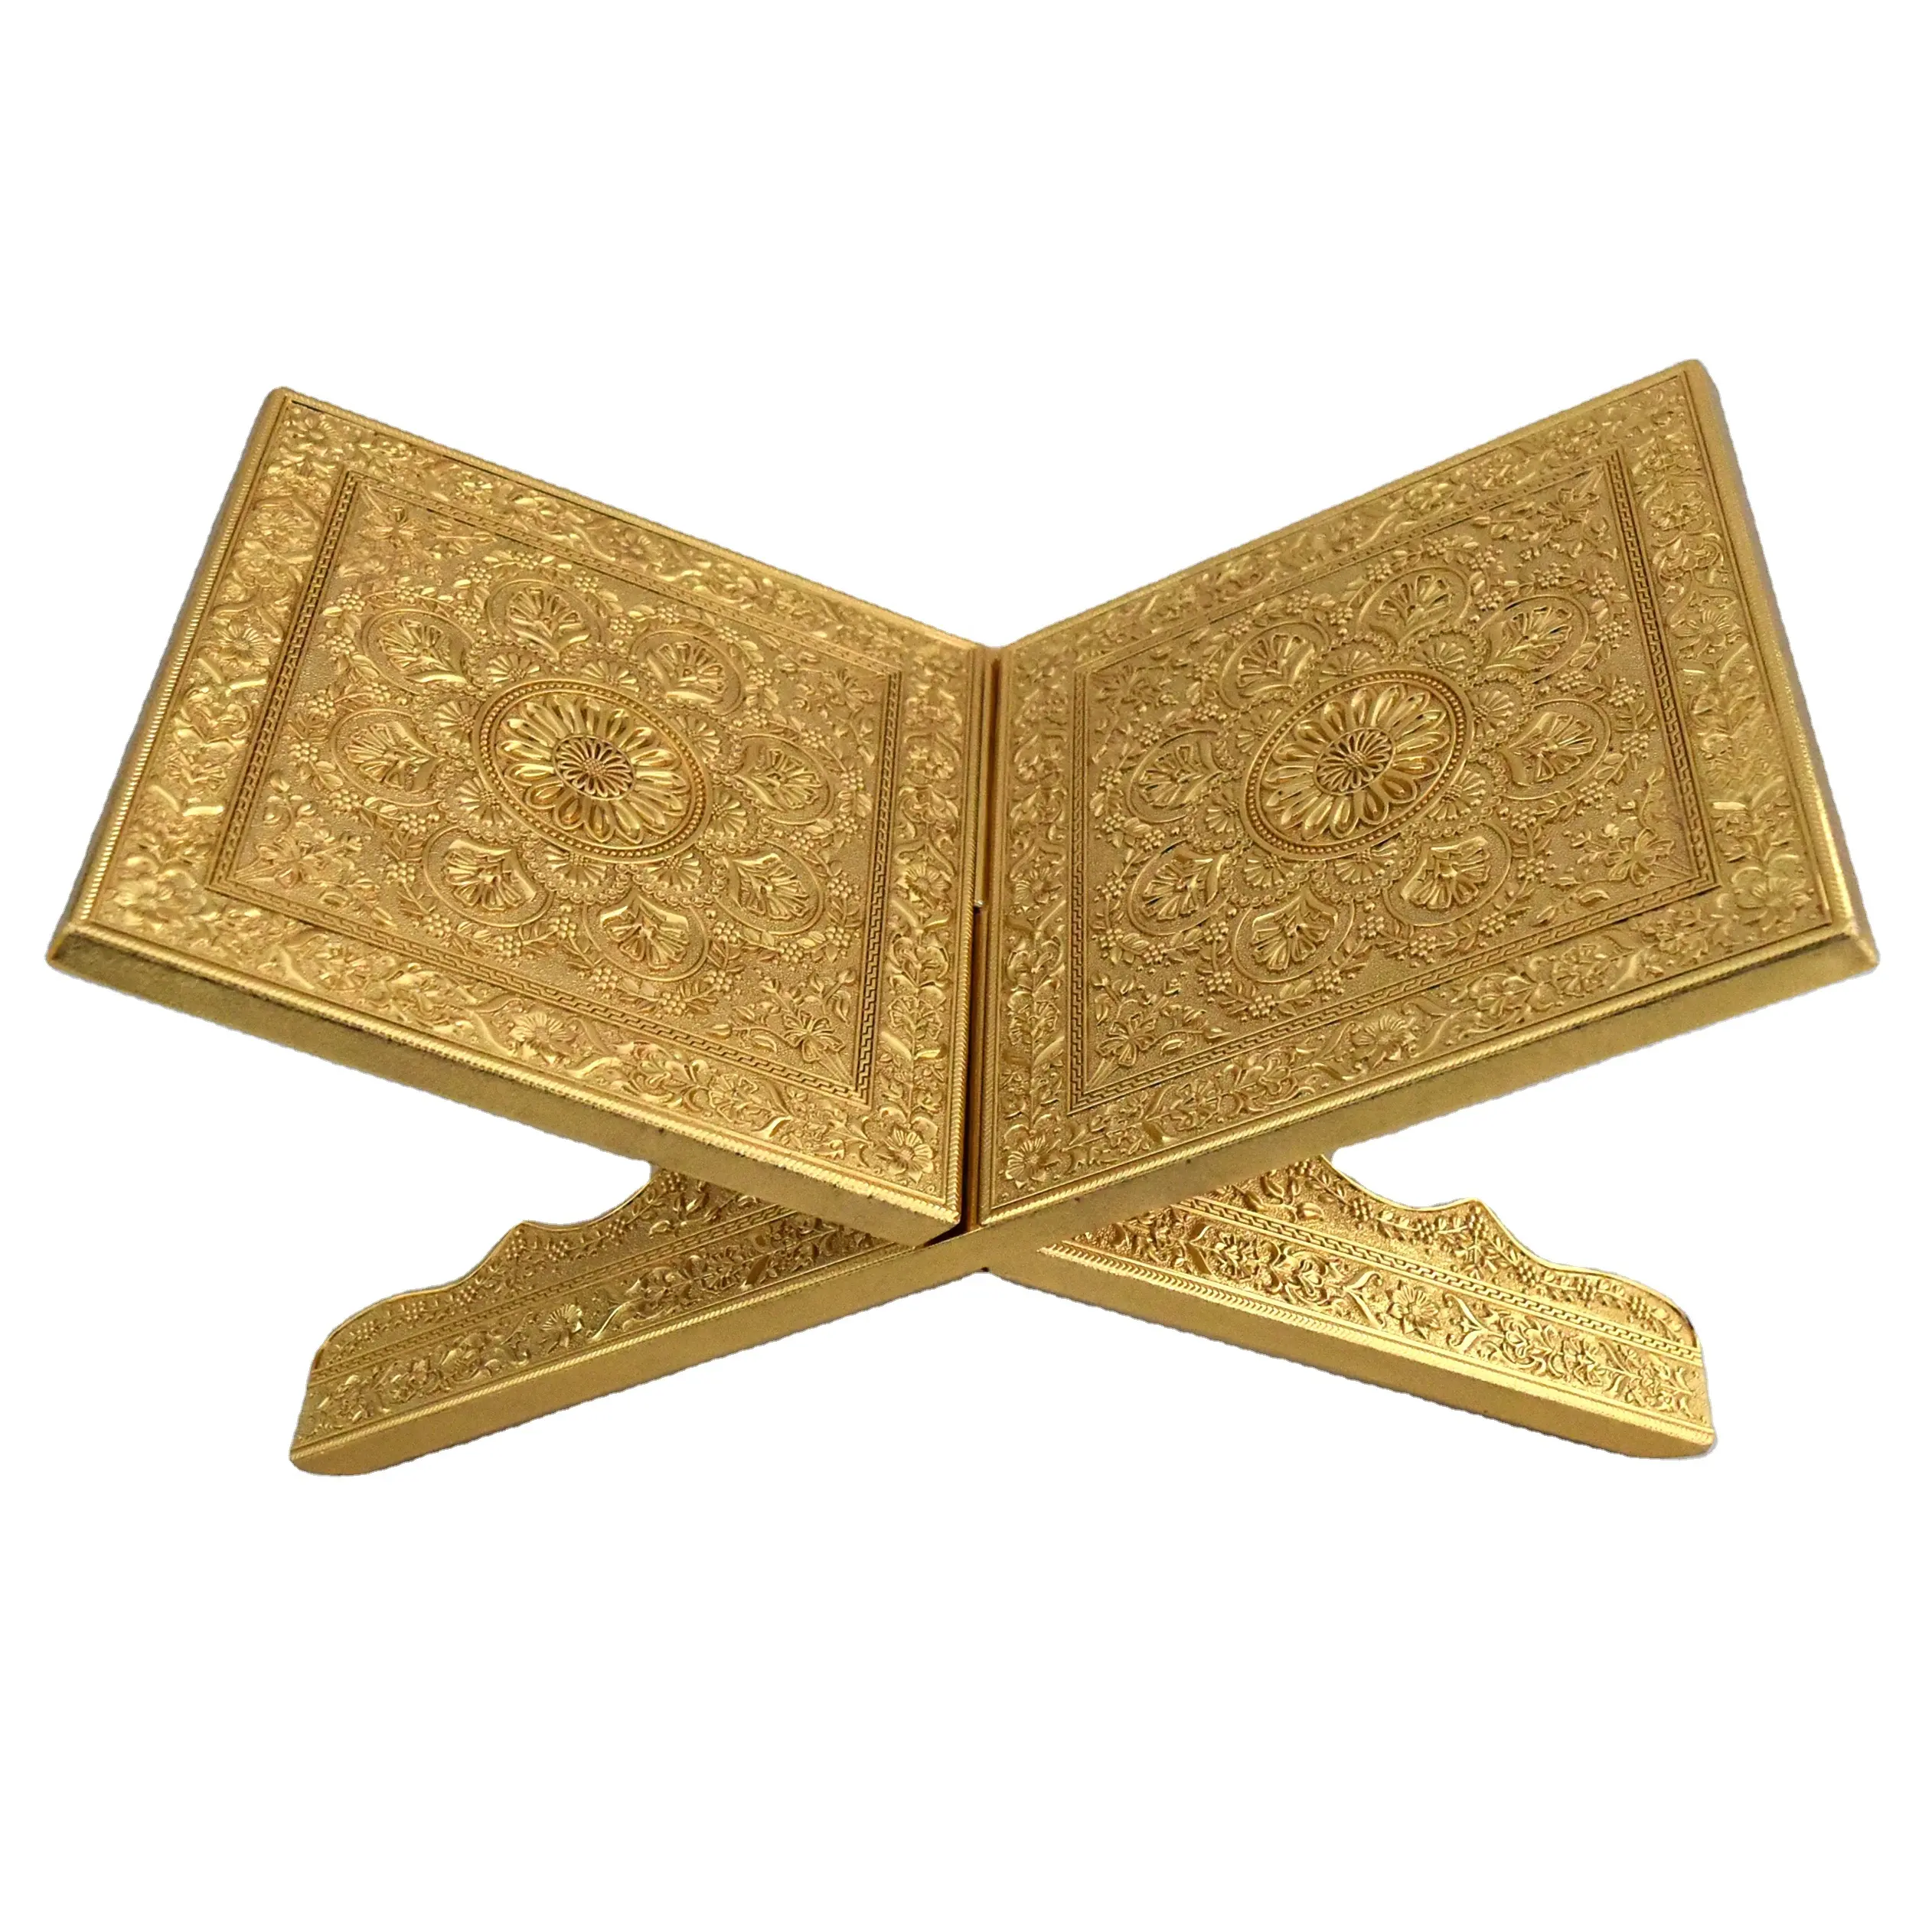 Book Stand Craft Rectangle Quran Bible Folding Die Souvenir Coin Gold Plated Arabian Muslim Portable Metal Casting Metal Silver